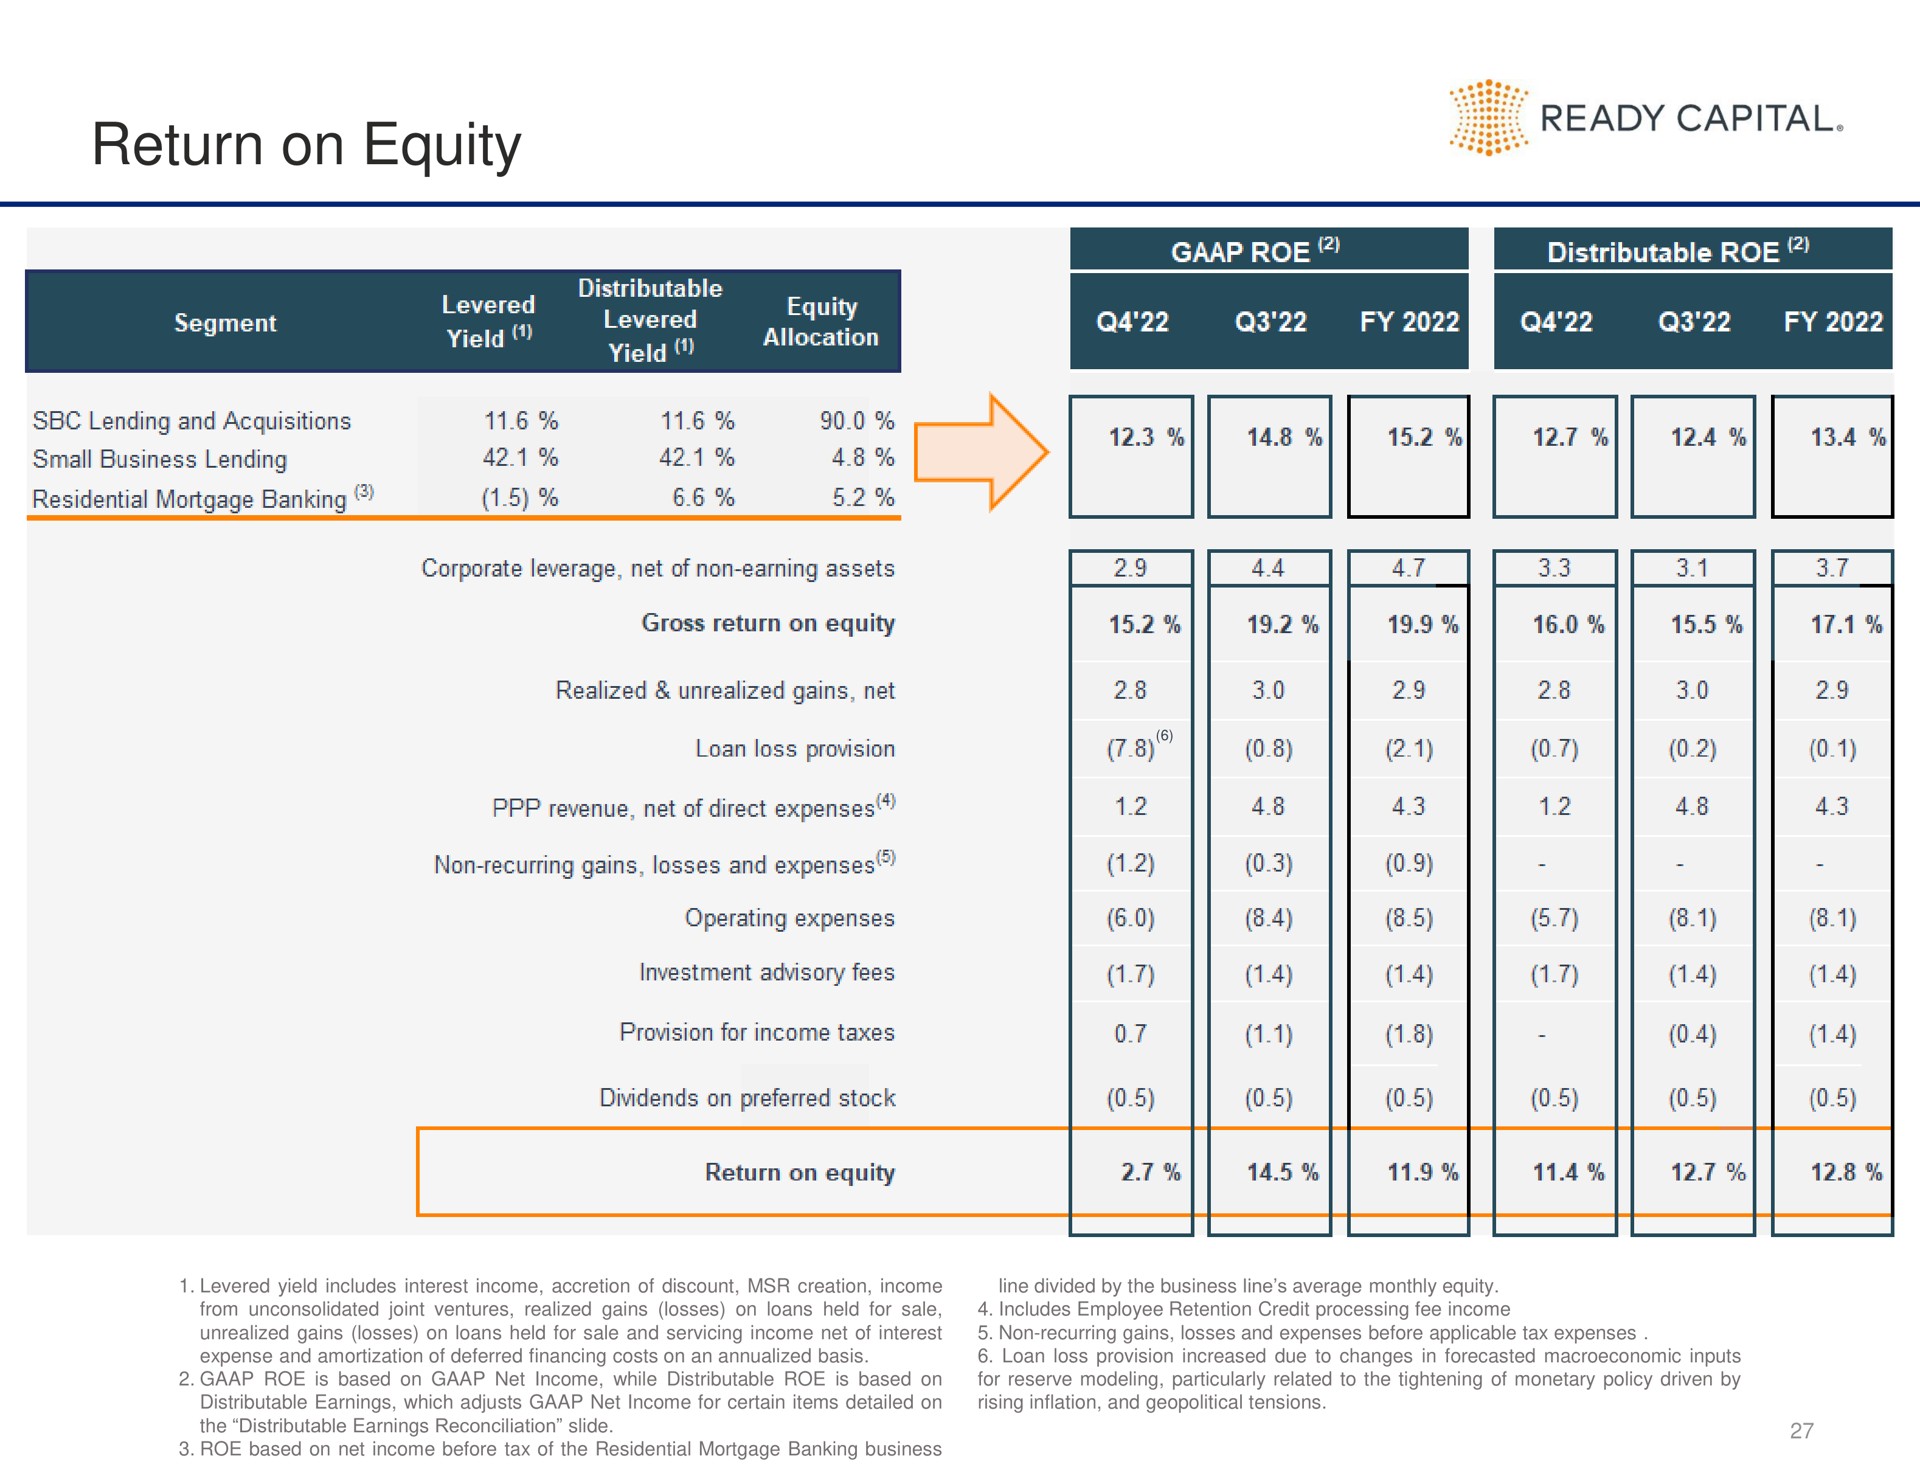 return on equity corporate leverage net of non assets | Ready Capital